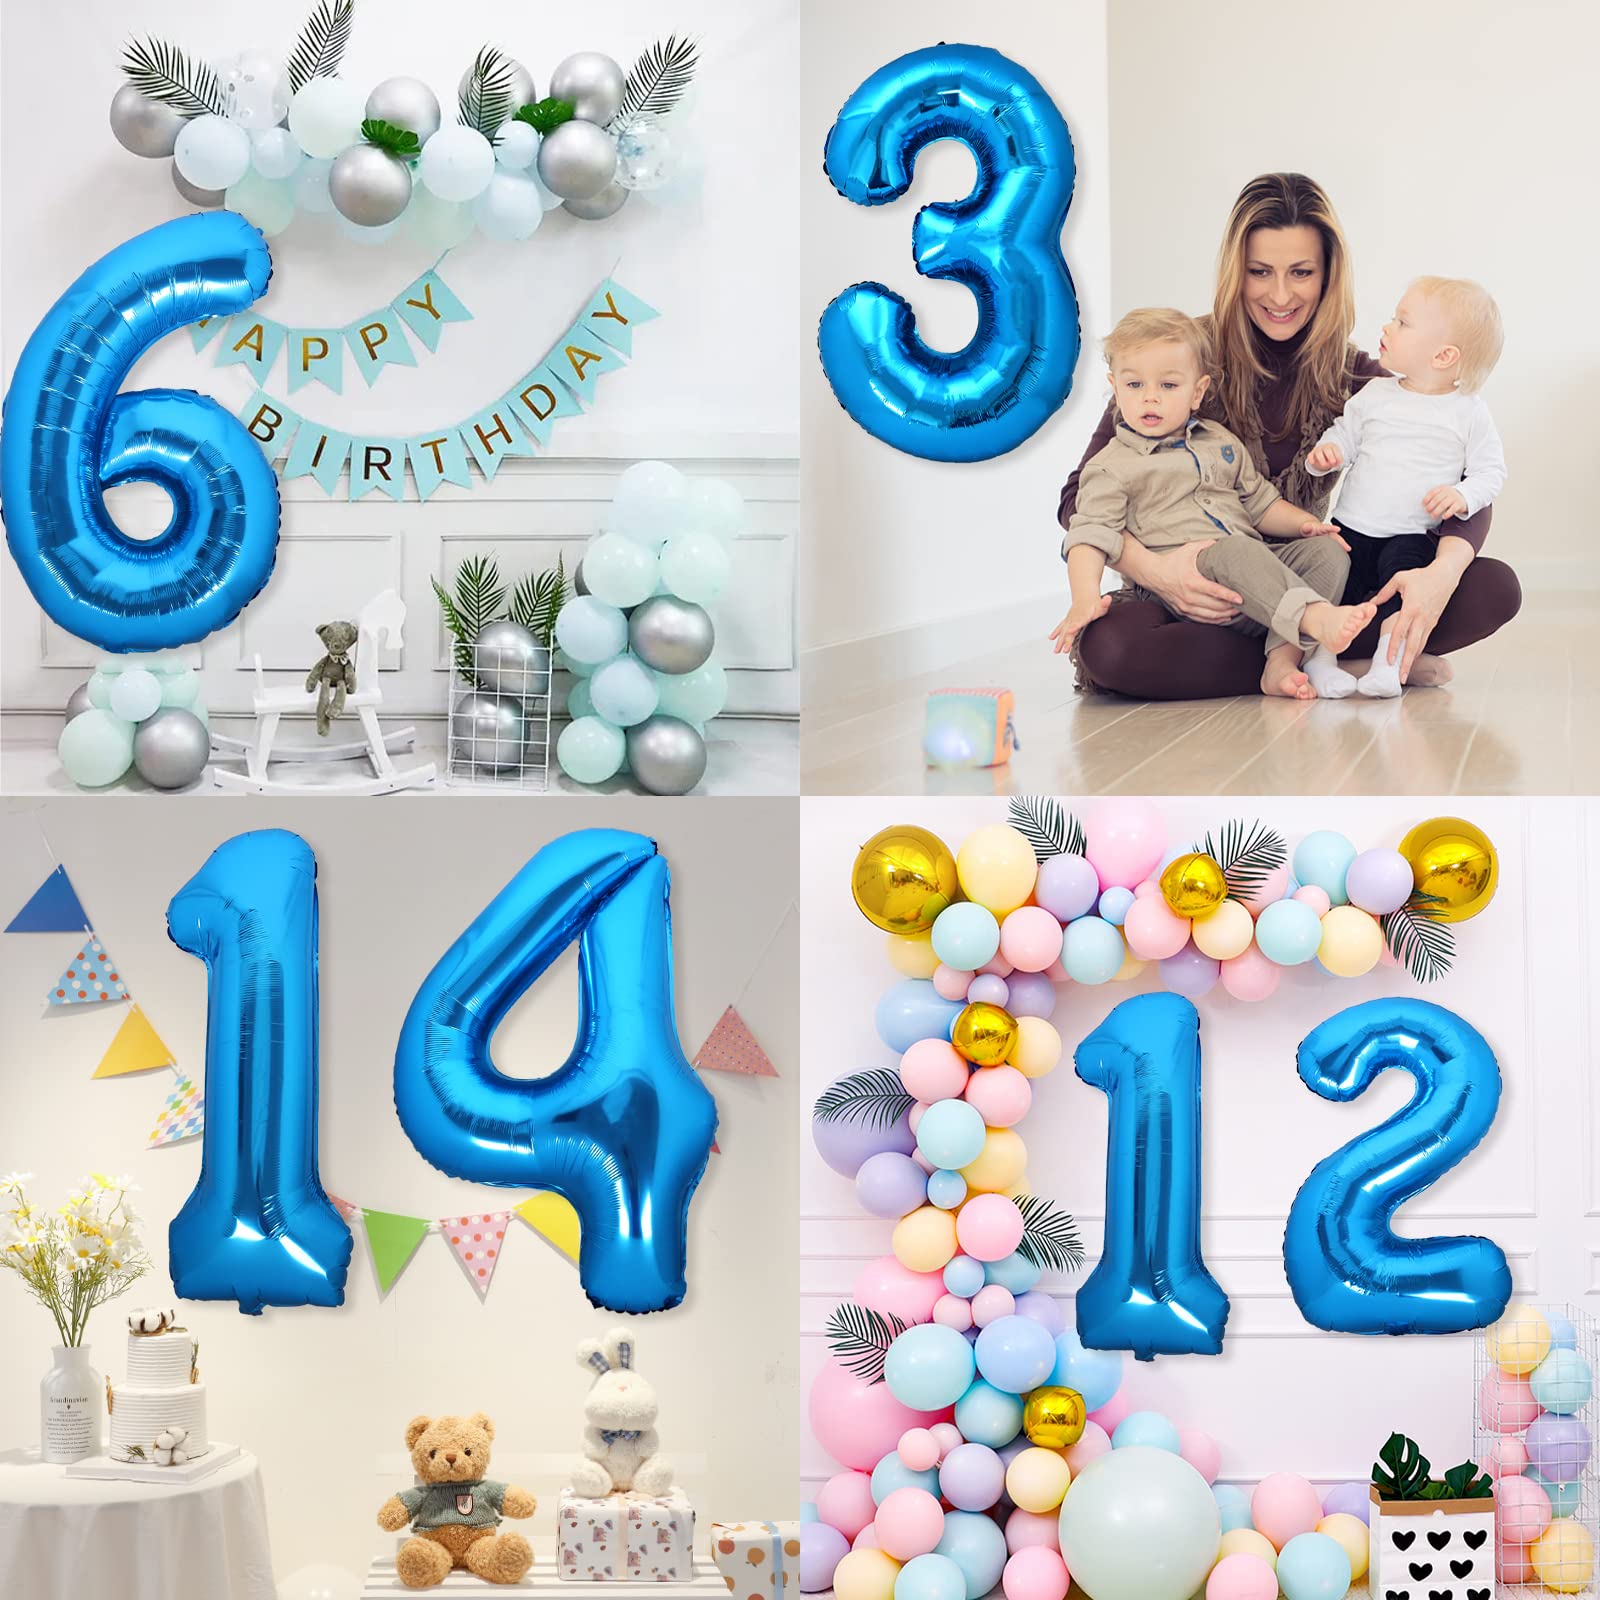 40 Inch Giant Blue Number 9 Balloon, Helium Mylar Foil Number Balloons for Birthday Party, 9th Birthday Decorations for Kids, Anniversary Party Decorations Supplies (Blue Number 9)